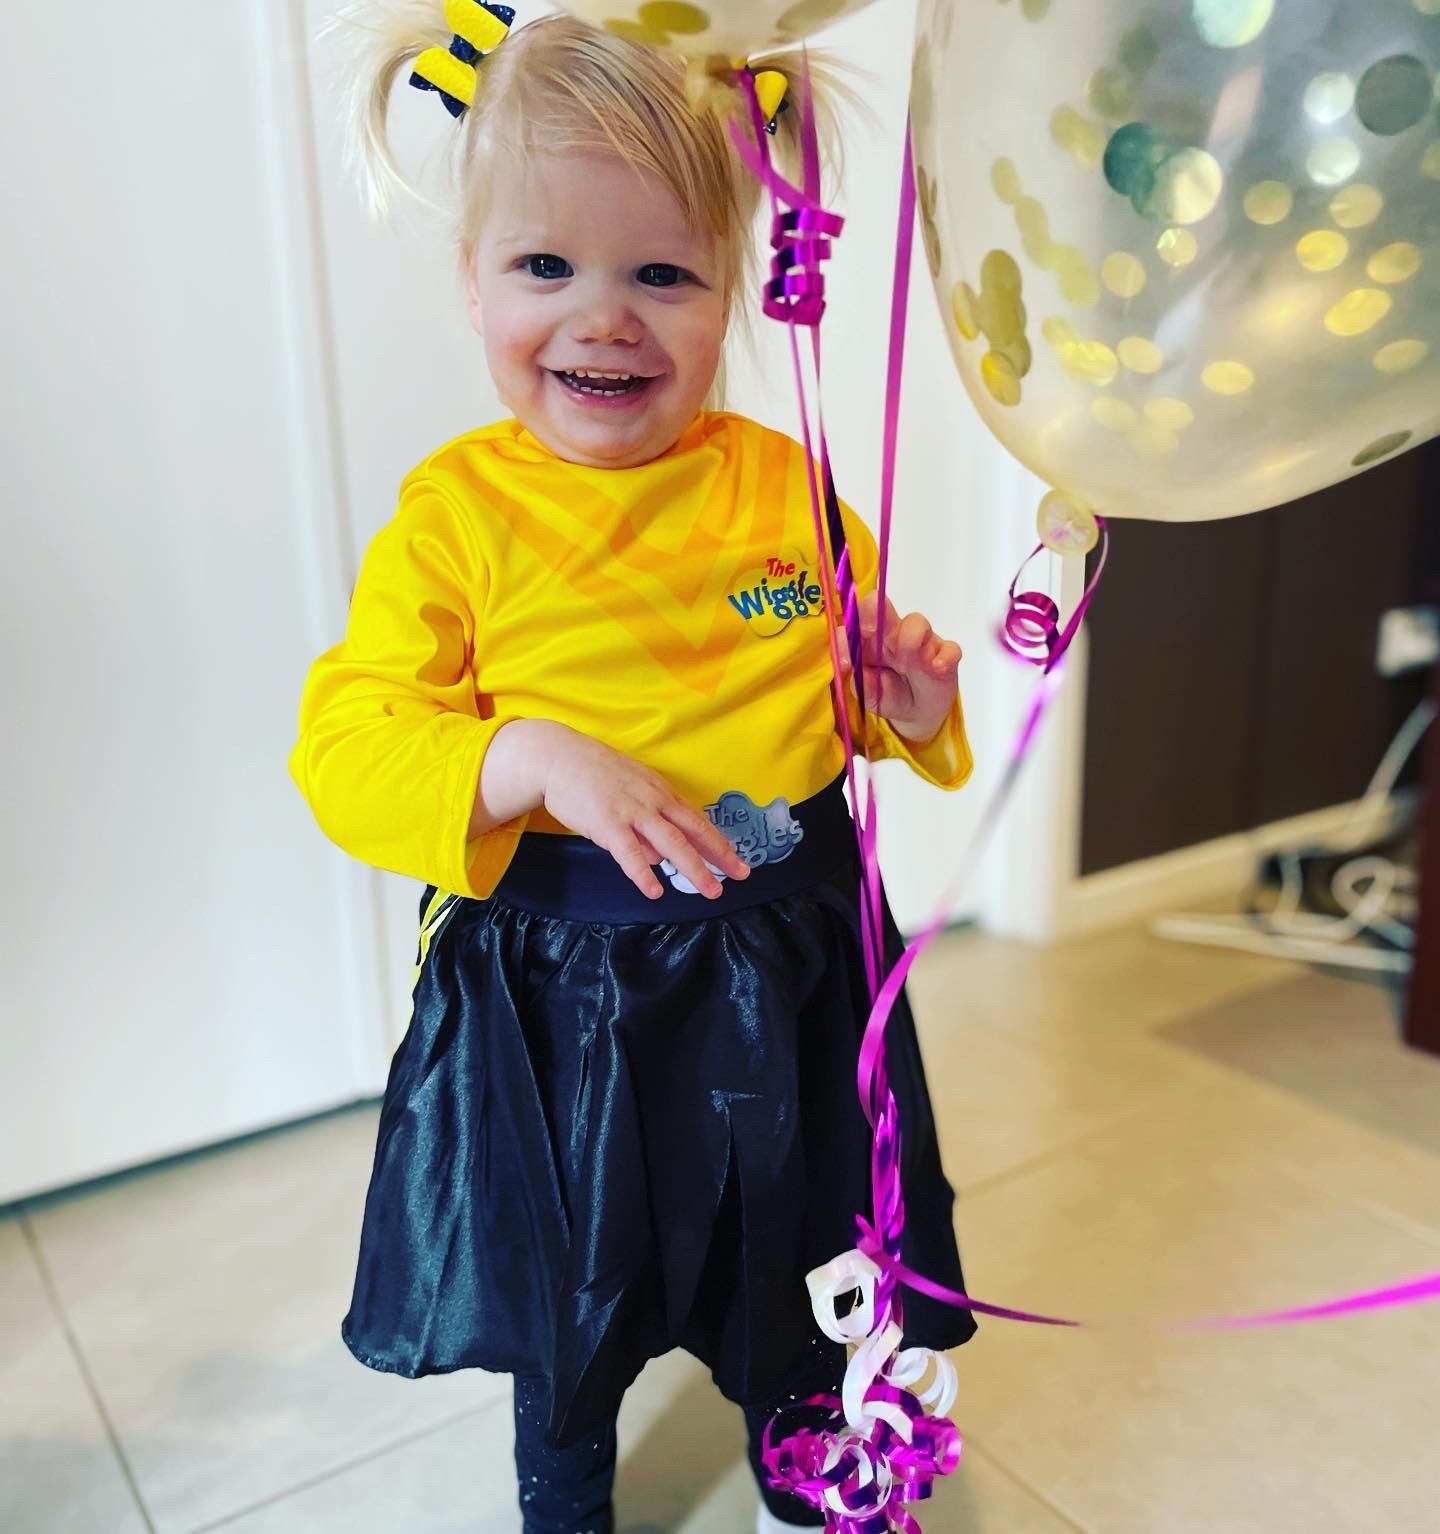 "Lucy wearing a yellow Wiggles shirt and skirt and smiling while holding a string attached to a helium-filled balloon."